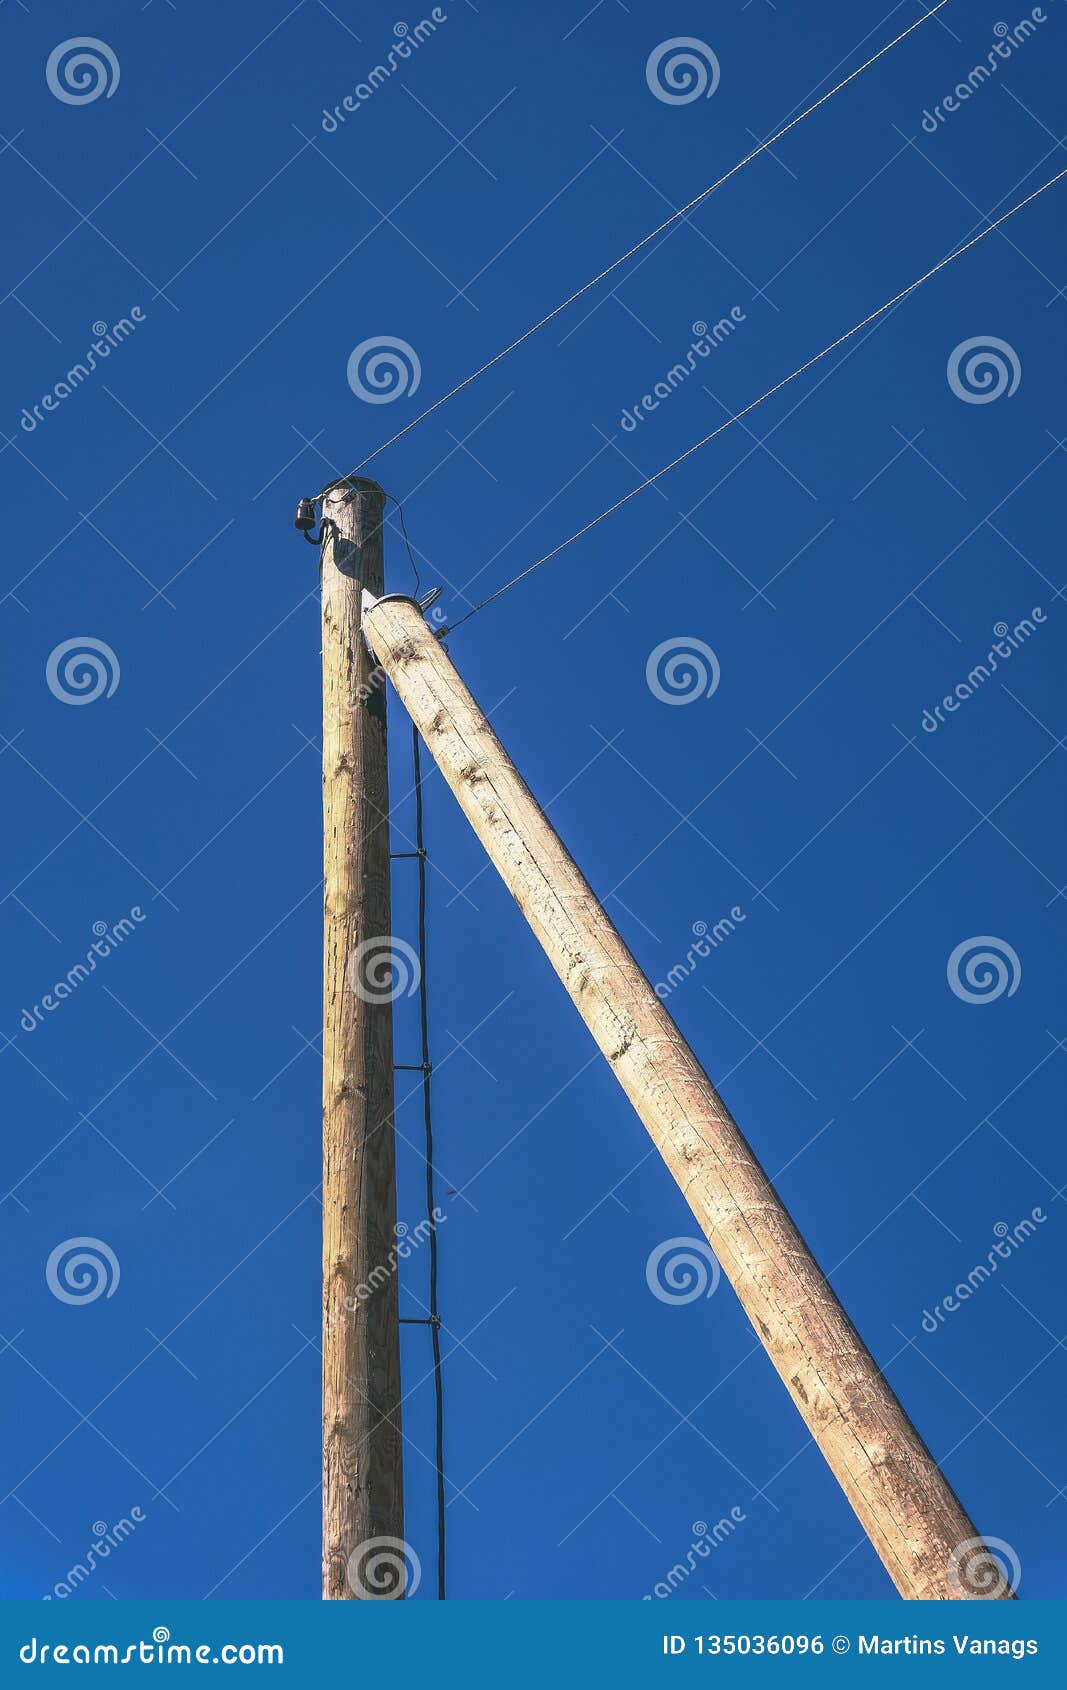 Eletricity Line Poles and Wires on Blu Sky - Vintage Retro Look Stock ...